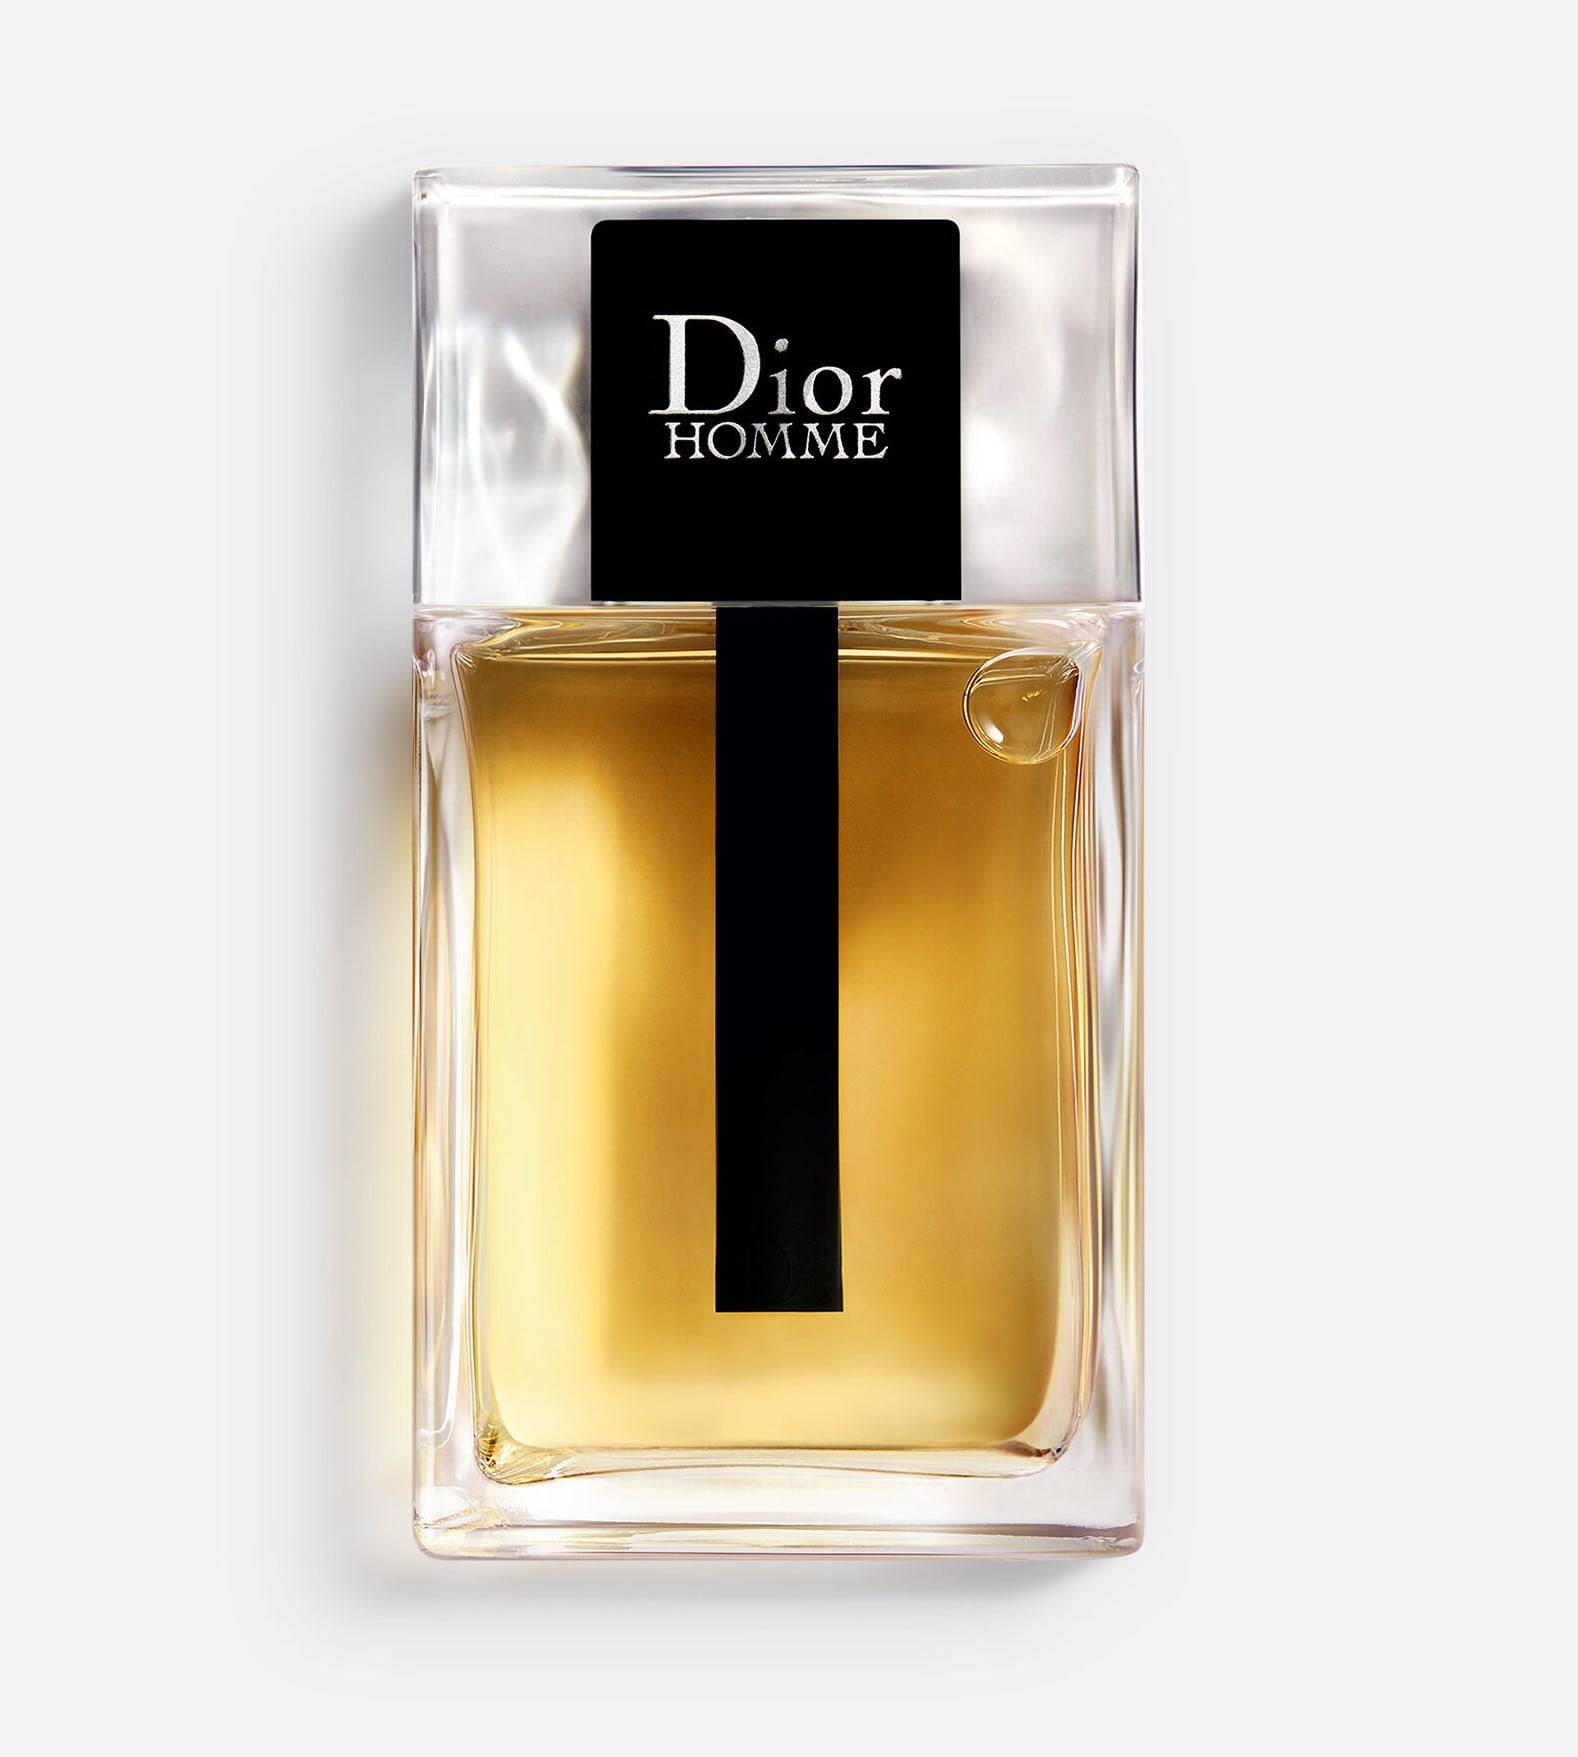 Dior Homme EDT Spray Perfume for Men by Dior